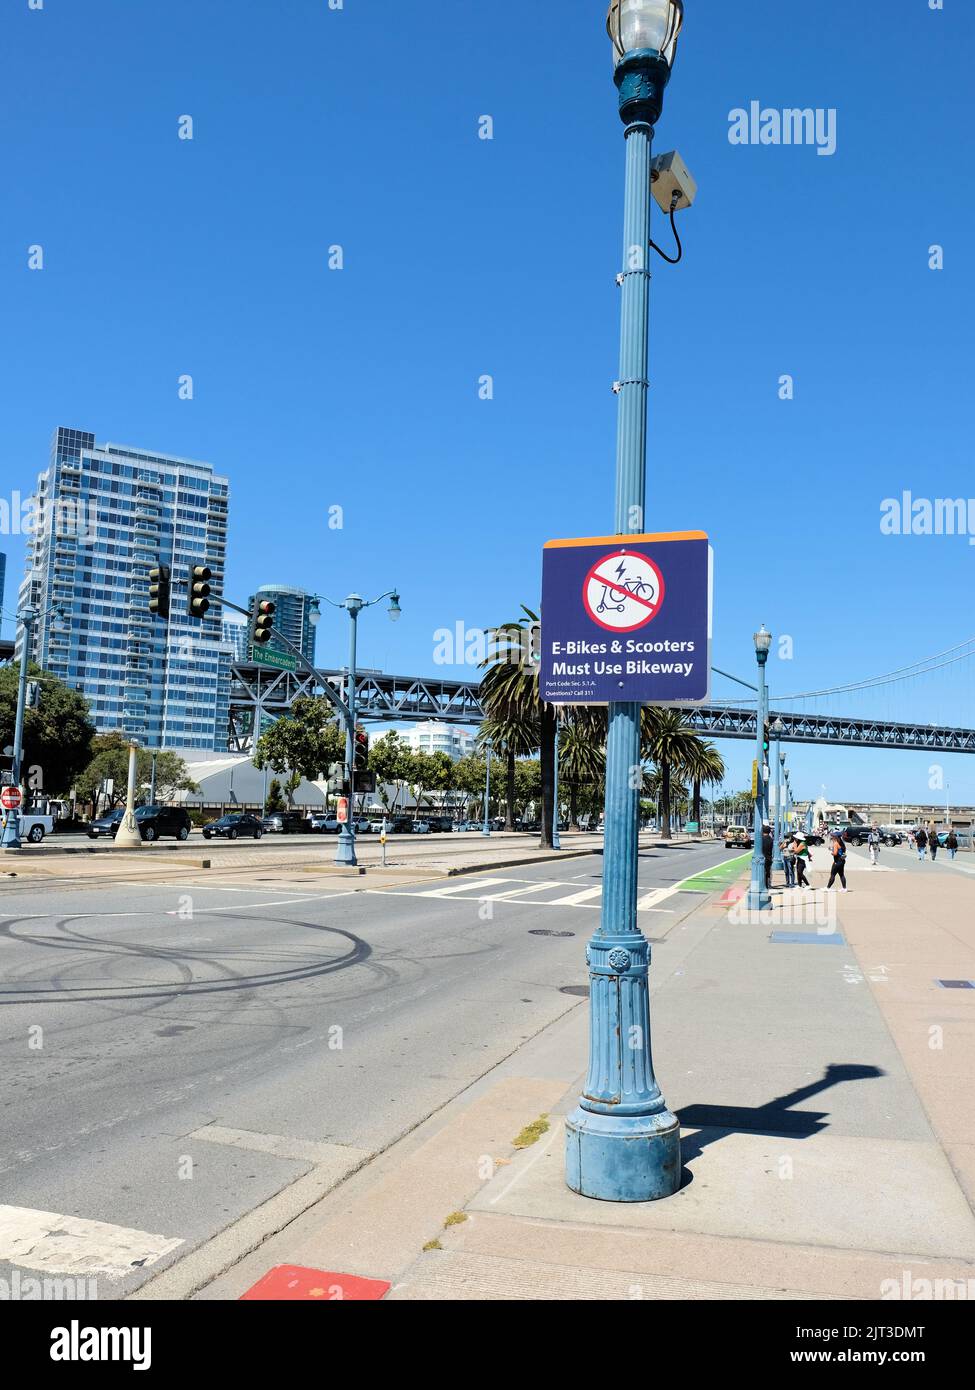 A street sign warning e-bikes and scooters to not ride on sidewalk in San Francisco, California's Embarcadero roadway; use bike path or bikeway. Stock Photo